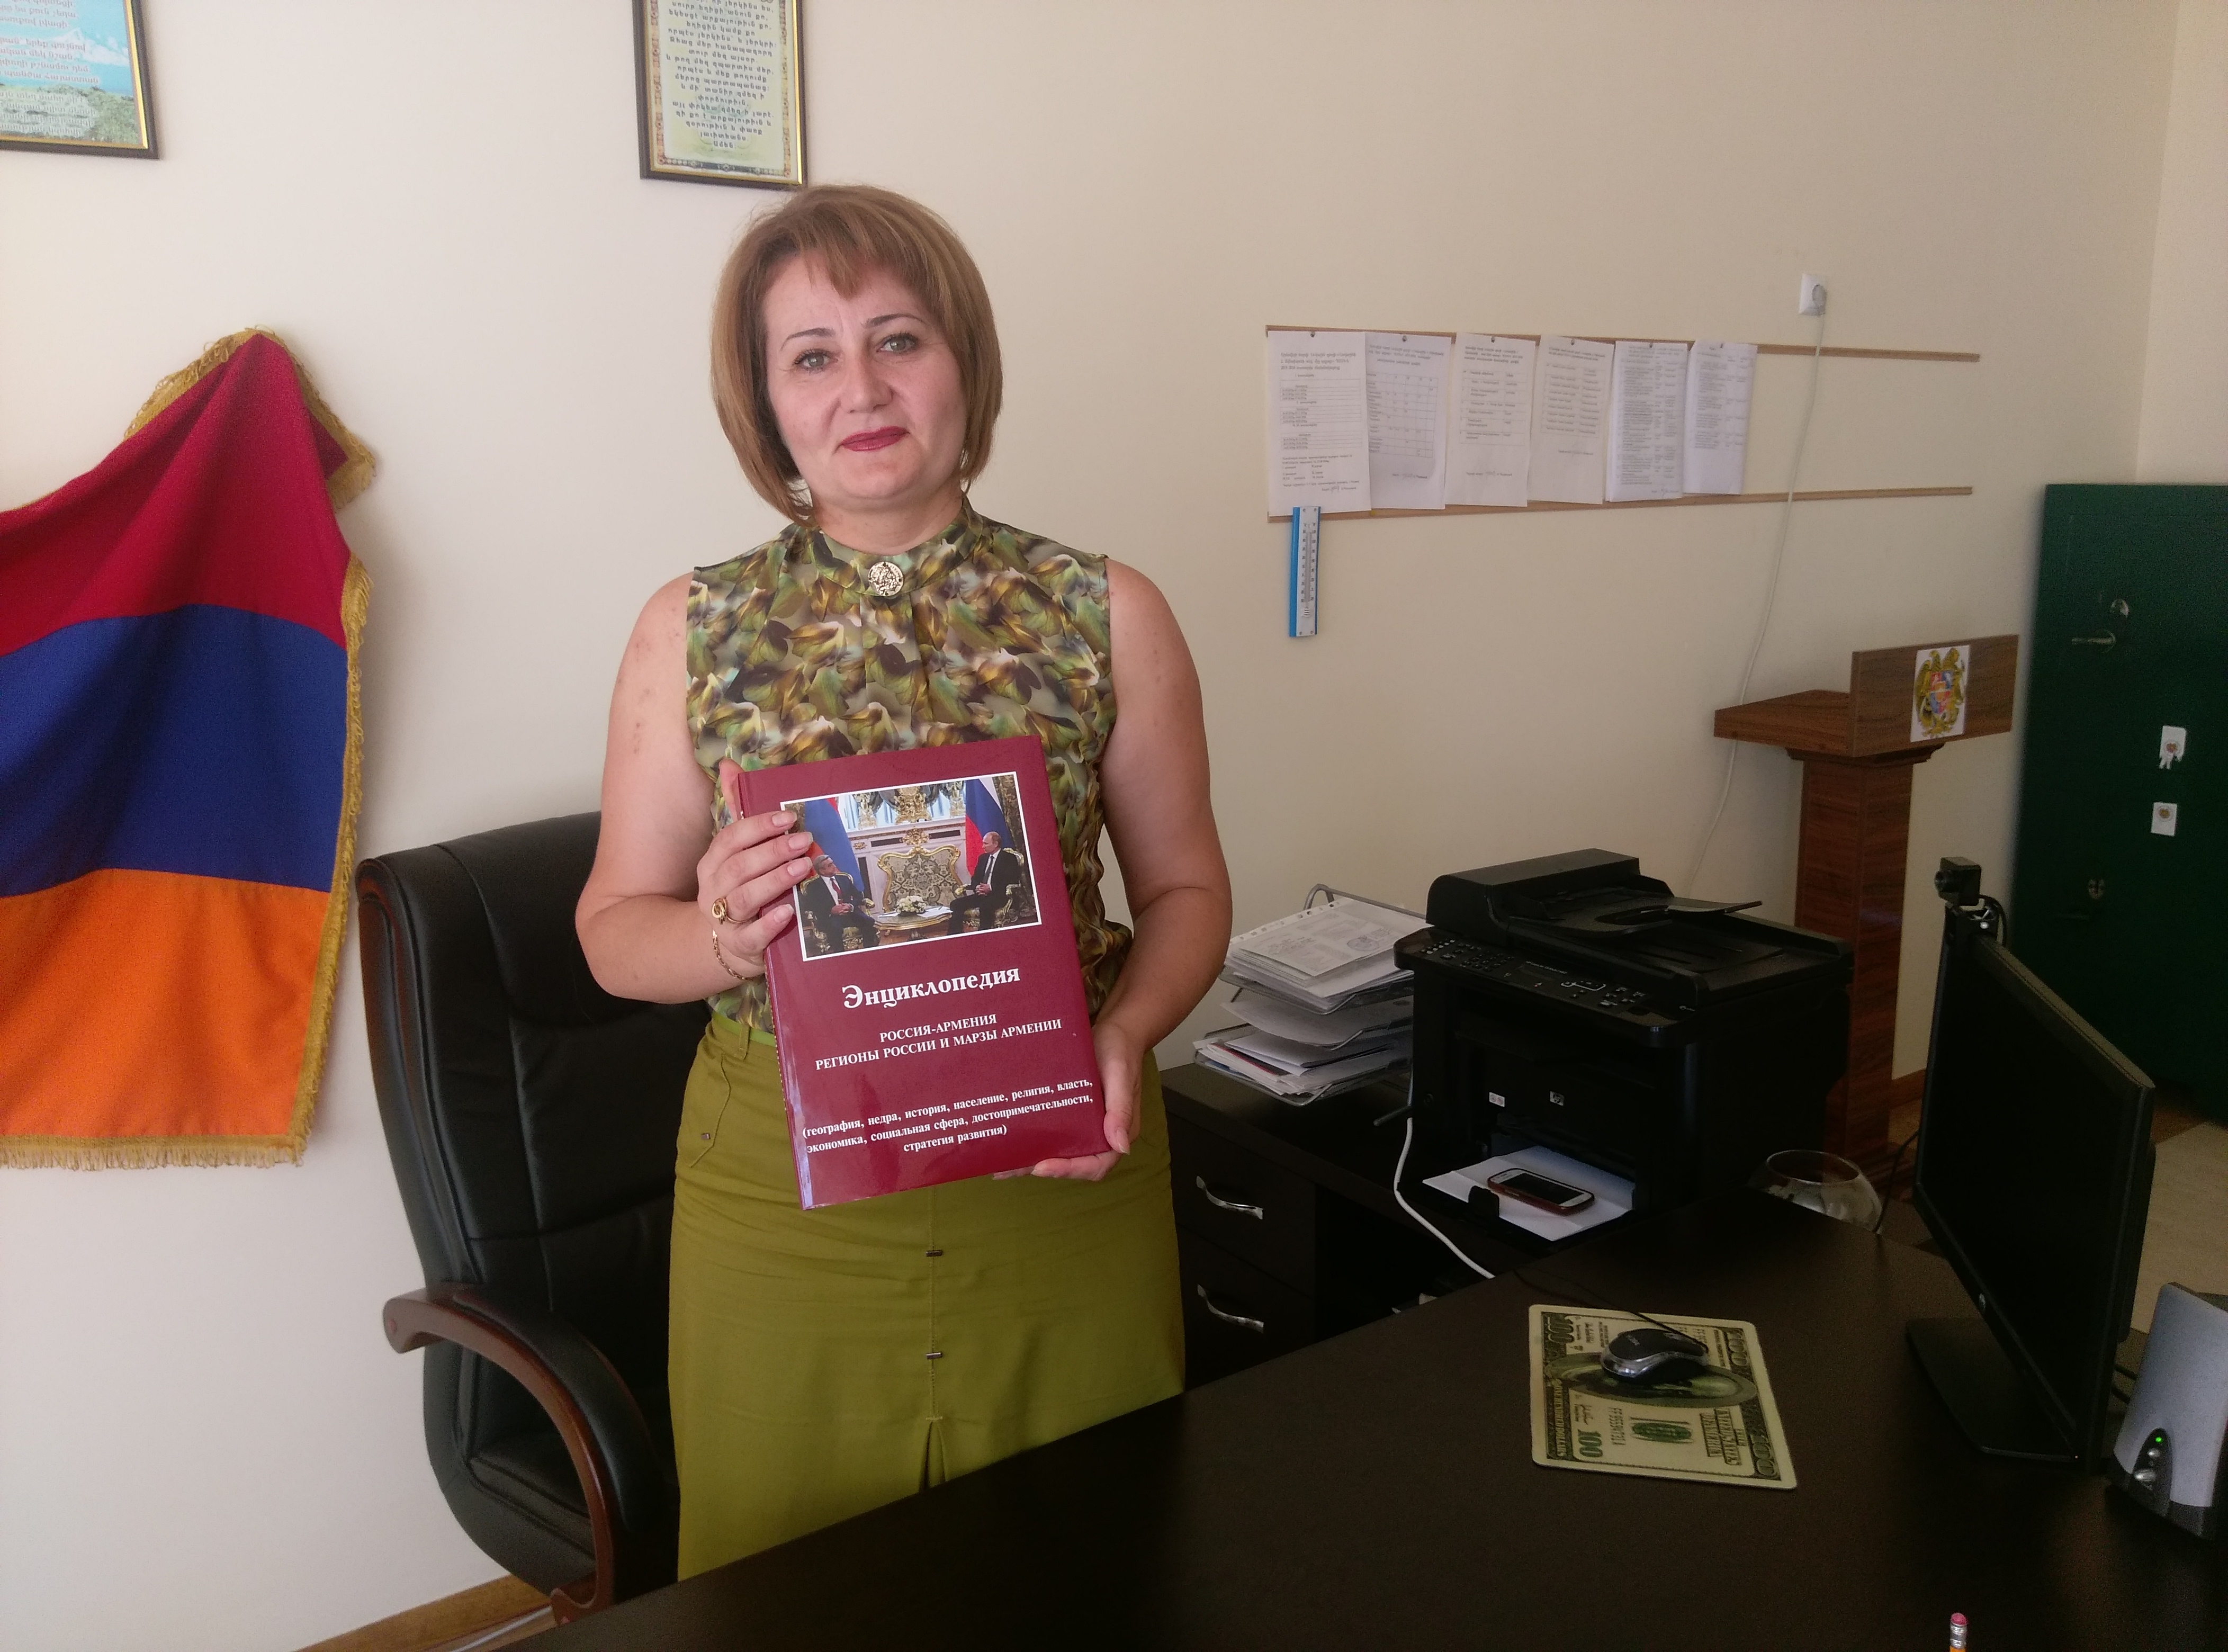 Areximbank-Gazprombank Group presents "Russia-Armenia. Regions of Russia and Marzes of Armenia" unique encyclopedia to schools of Armavir Marz